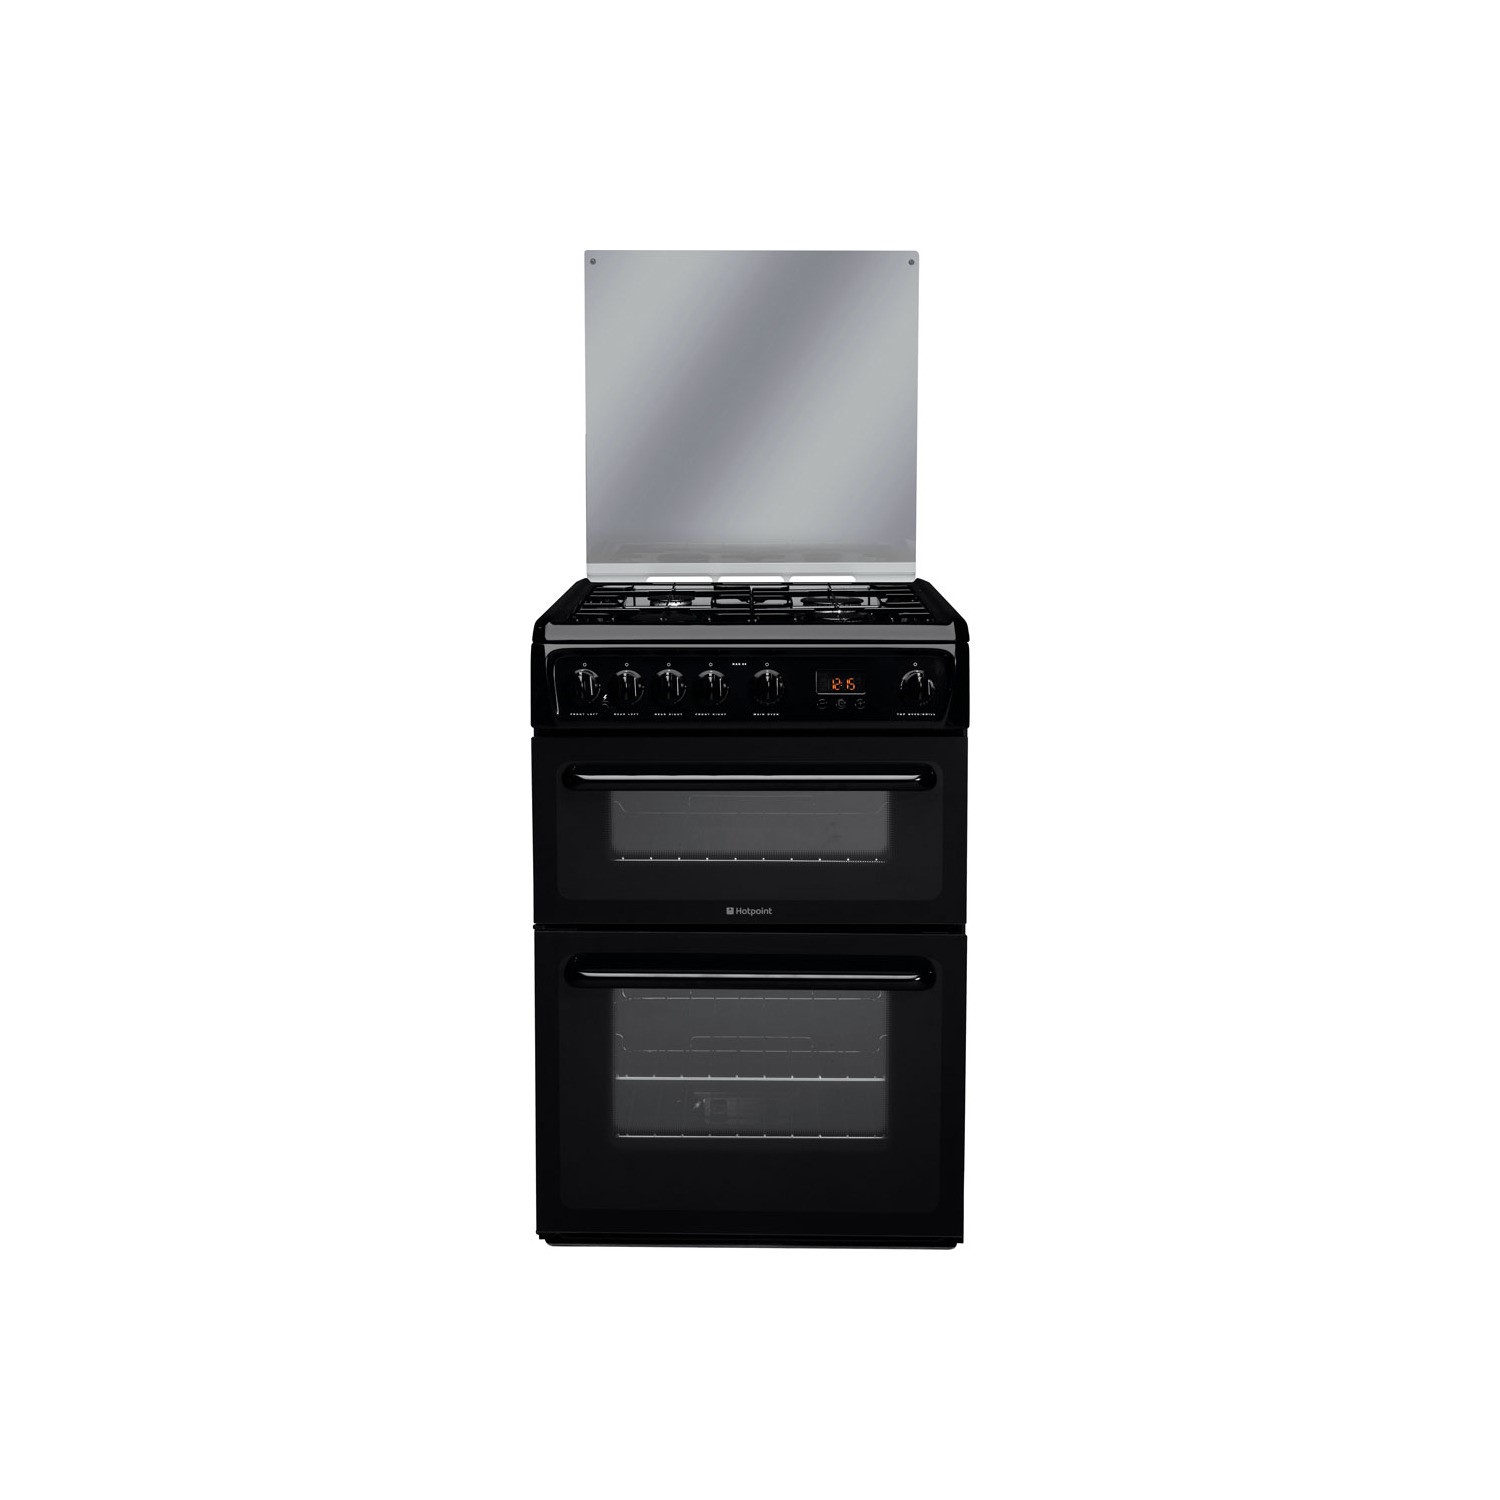 Refurbished Hotpoint HAGL60K 60cm Double Oven Gas Cooker with Lid Black